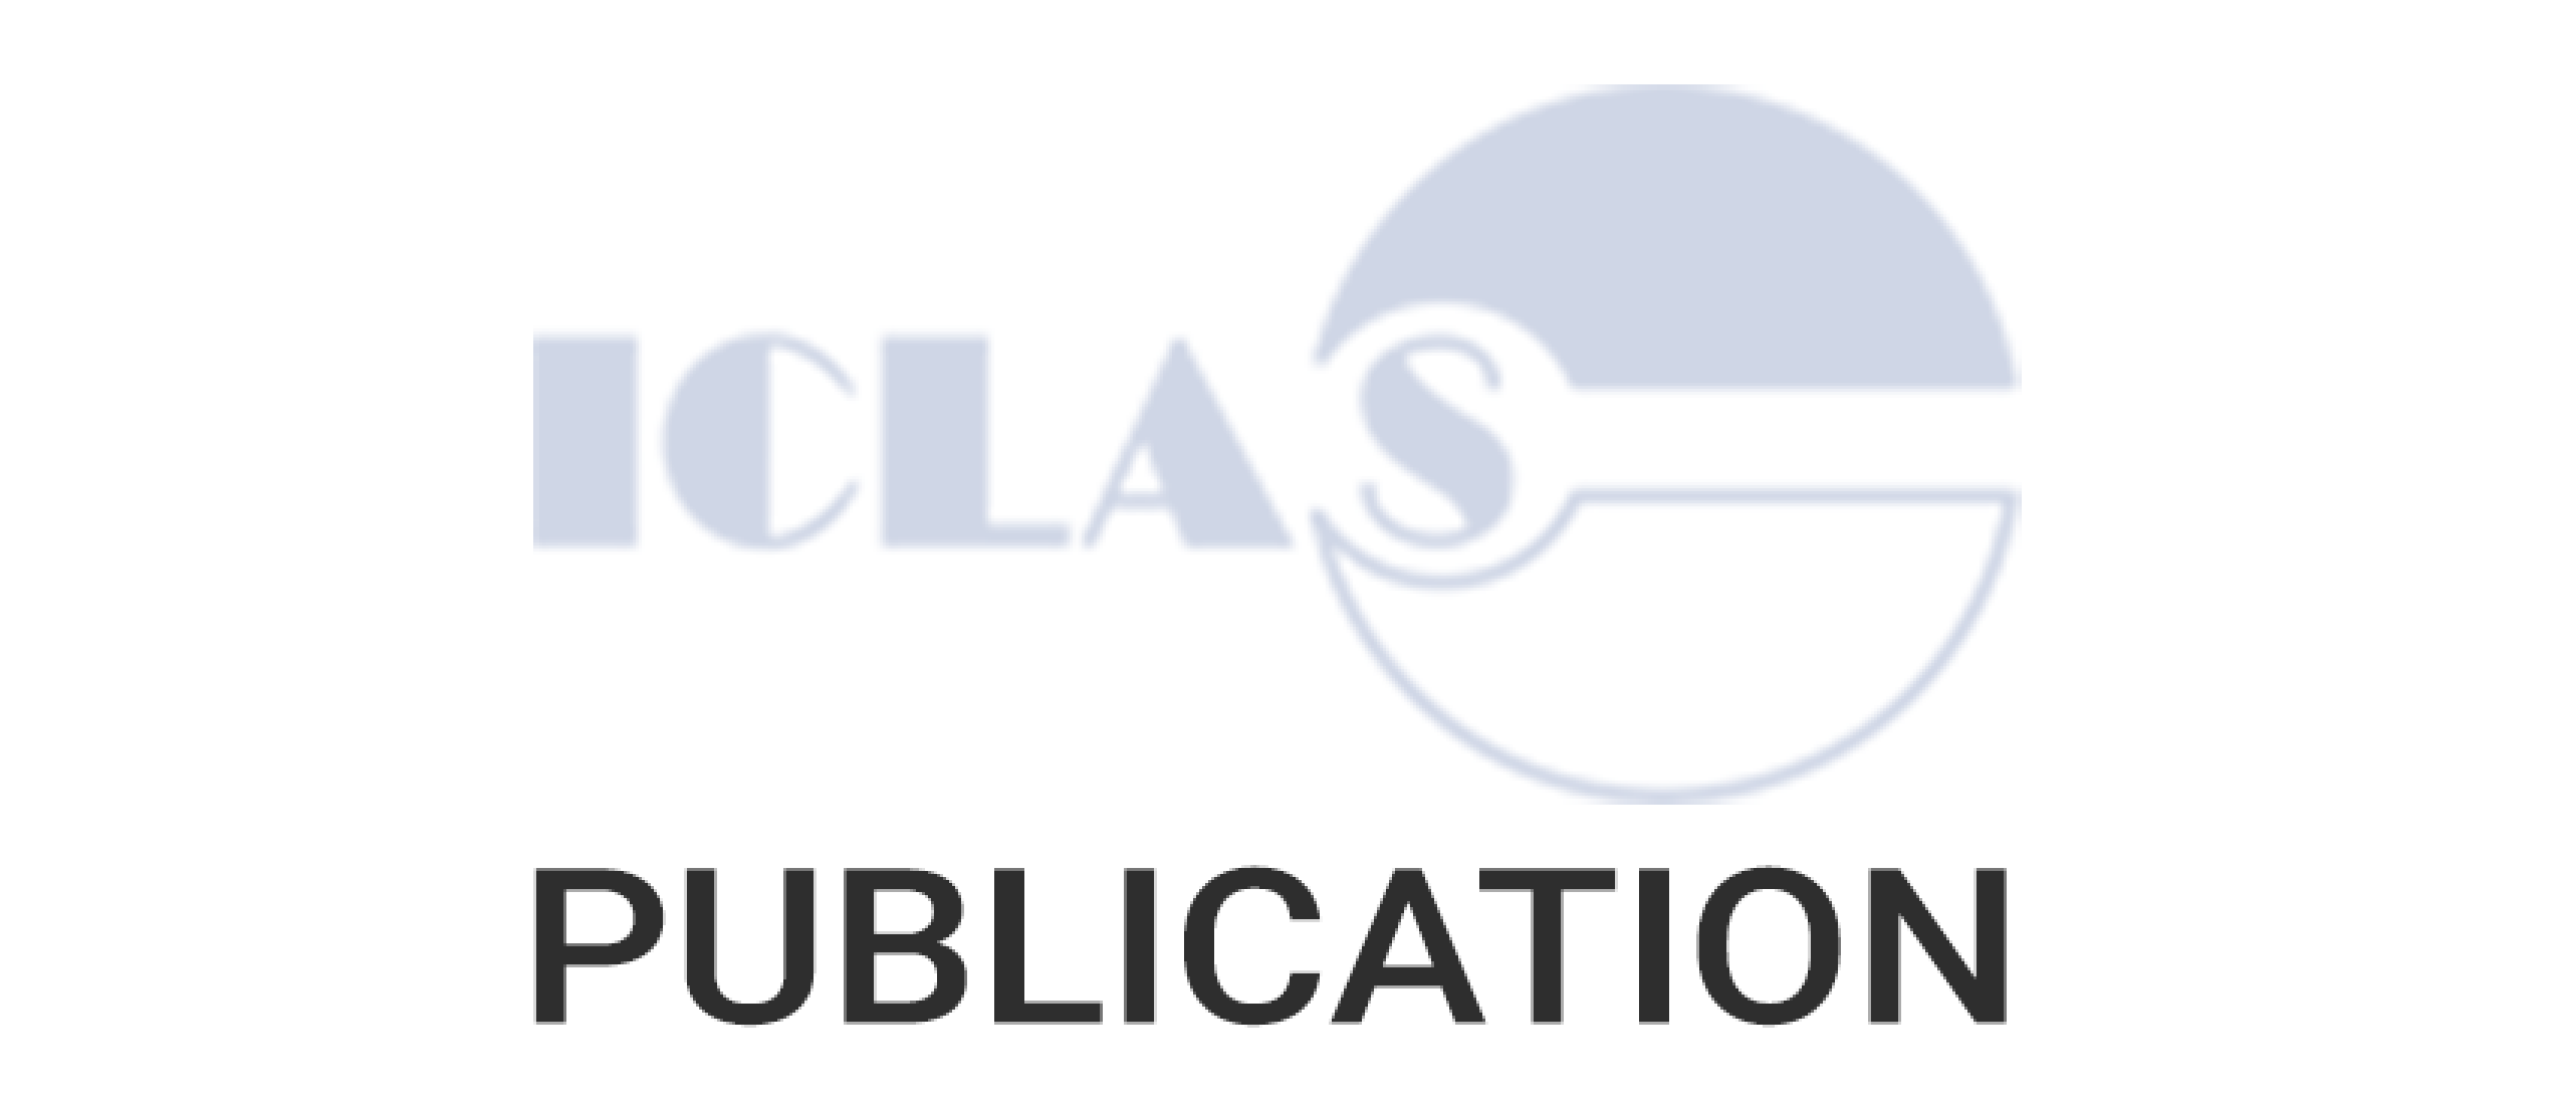 ICLAS working group on Harmonization: International guidance concerning the production care and use of genetically-altered animals